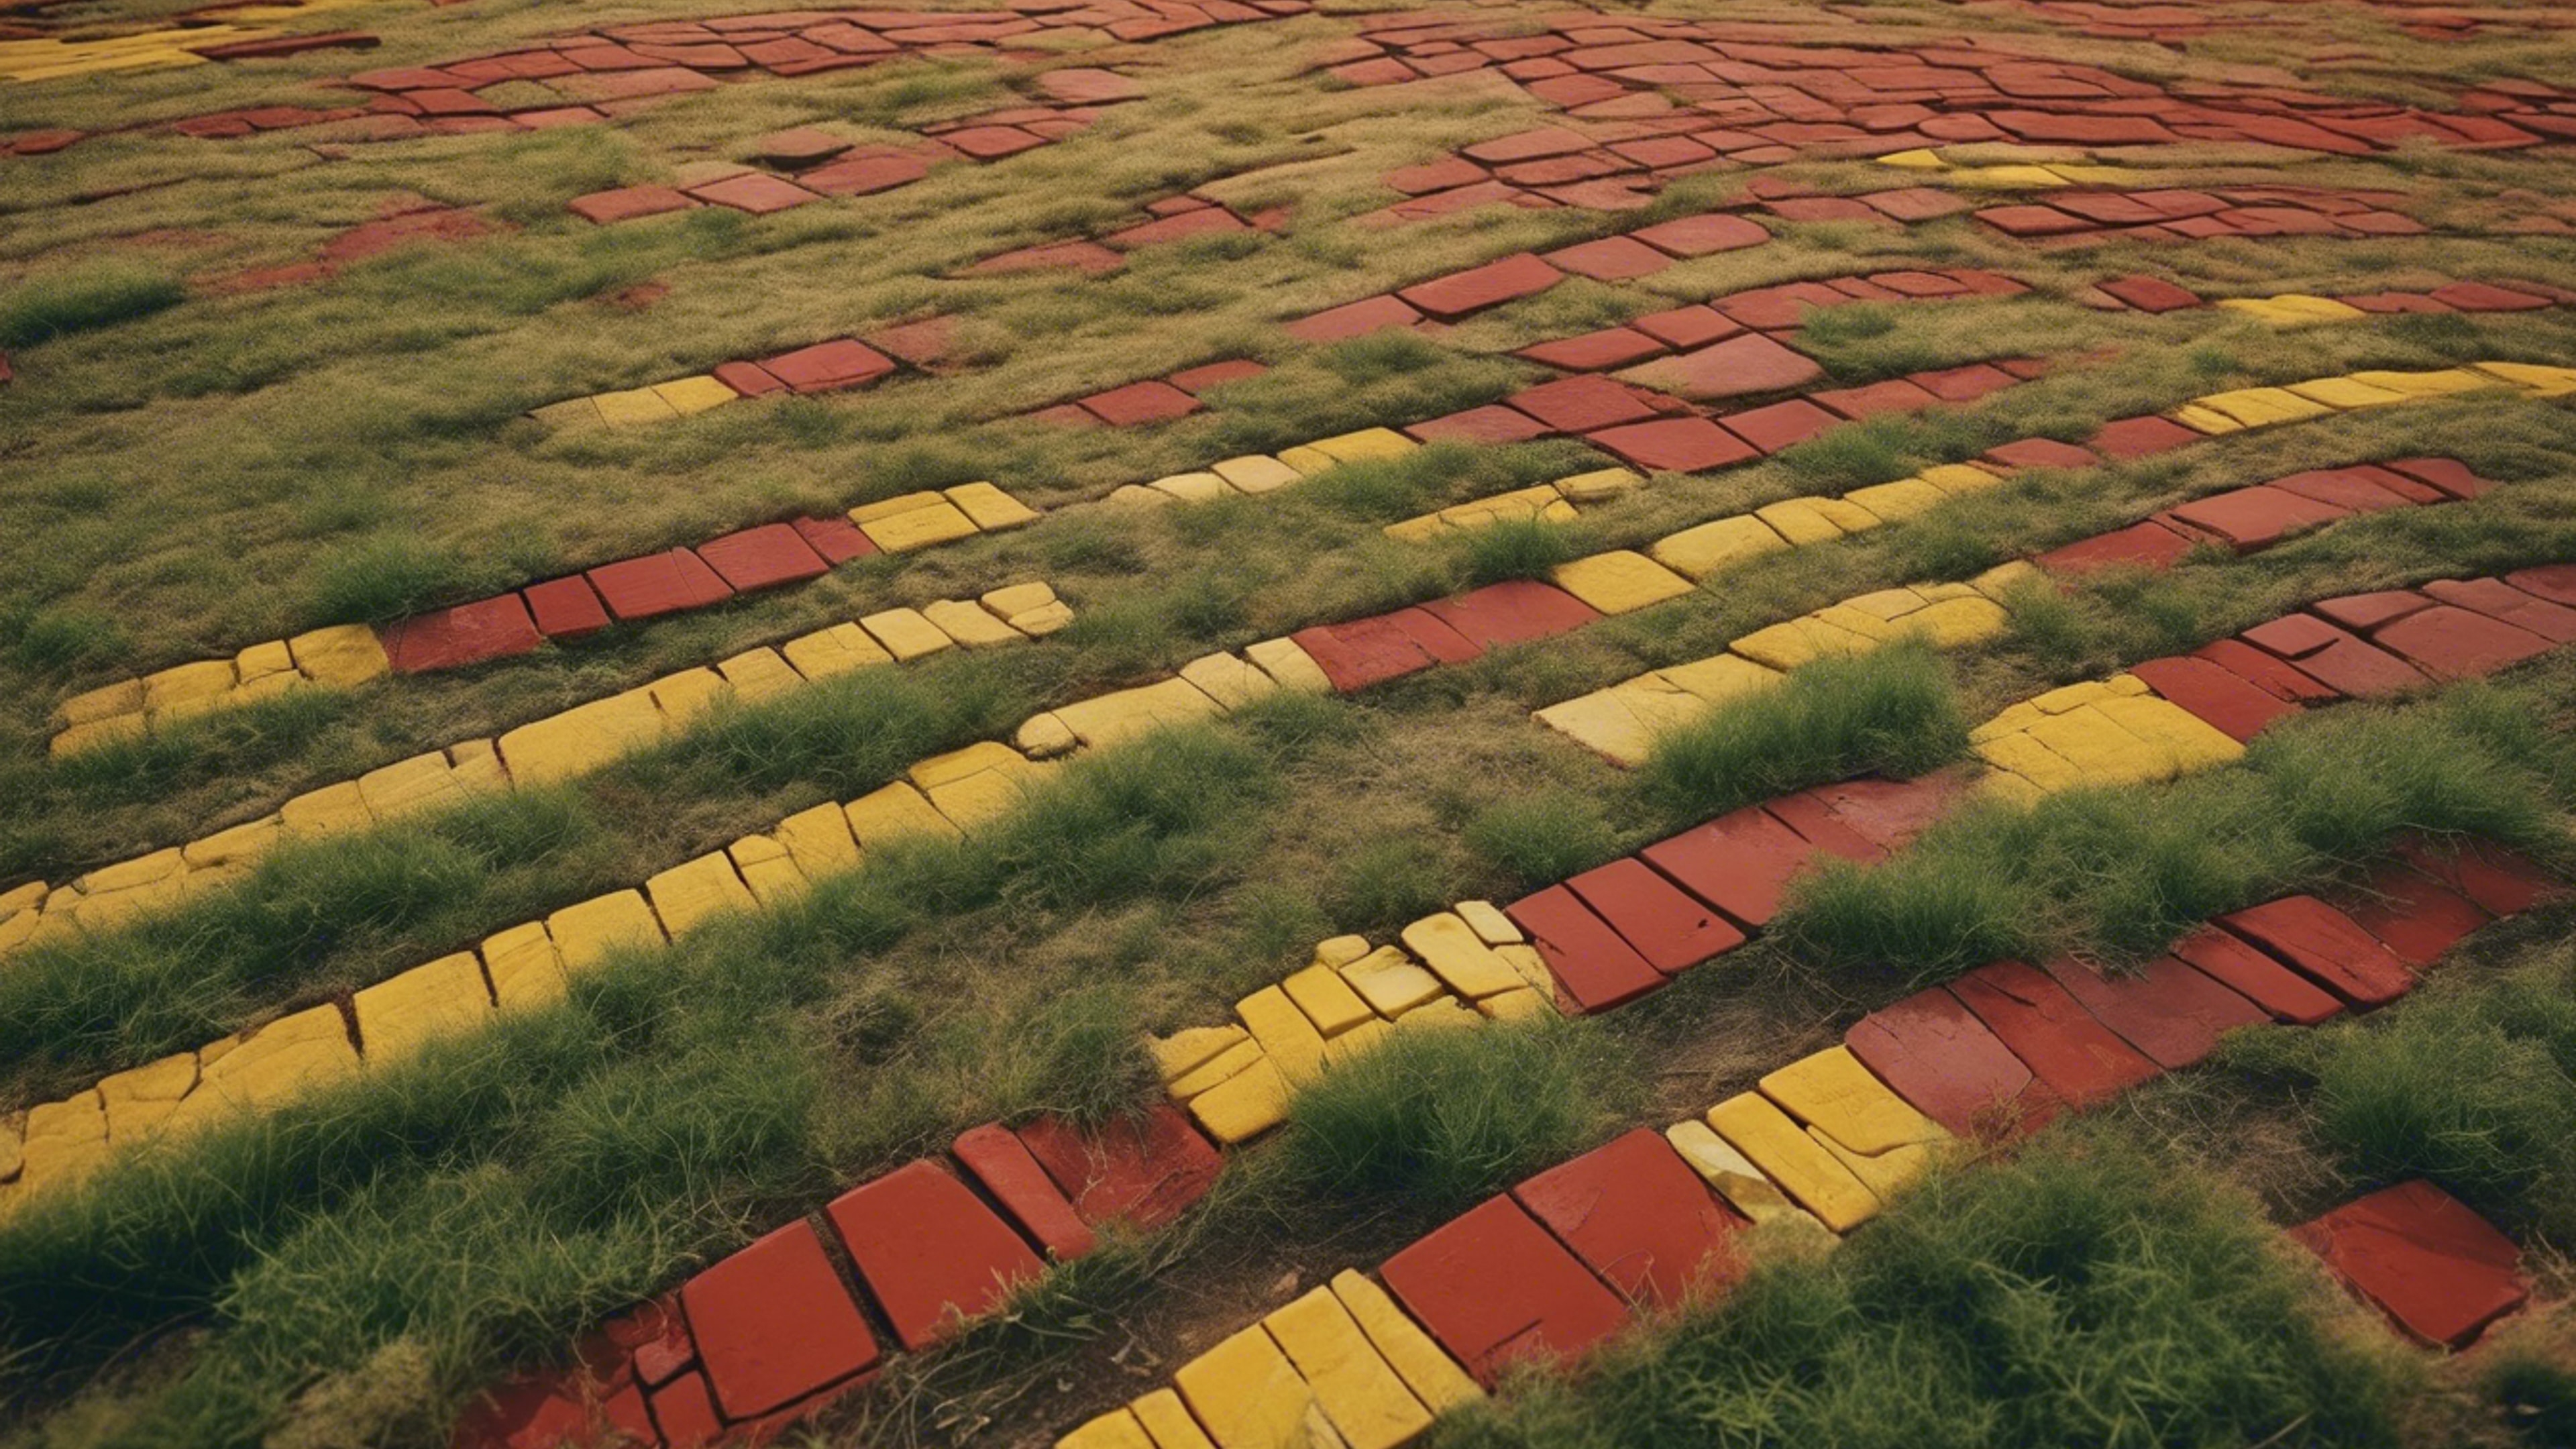 A bird's eye view of a red and yellow brick road weaving through a meadow. Обои[b665fbc055ed4704af98]